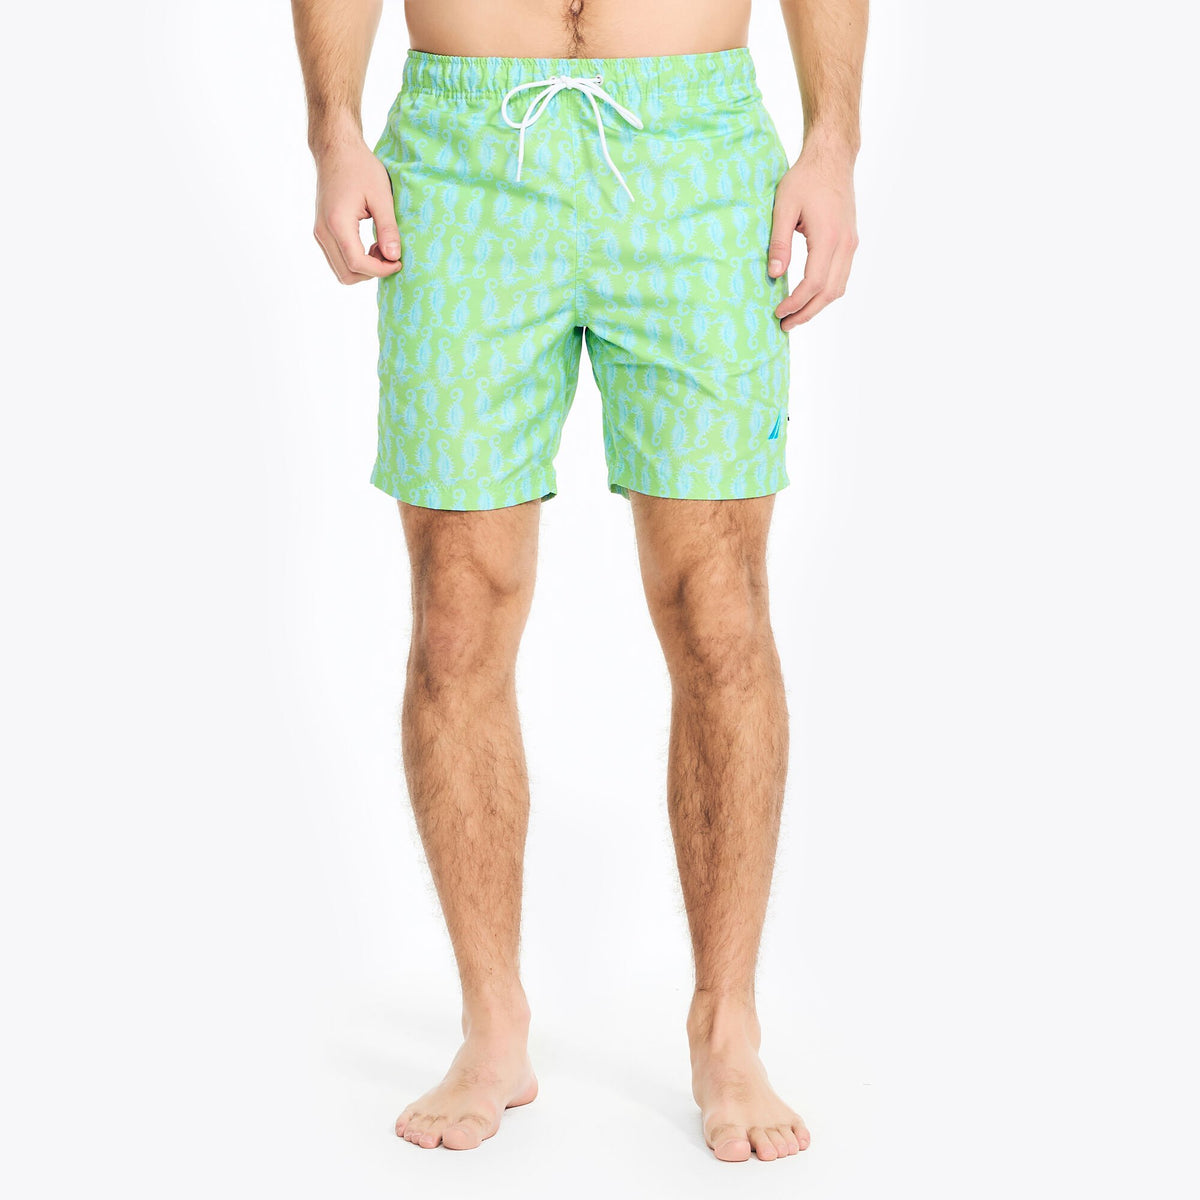 Nautica Men's Sustainably Crafted 8" Seahorse Print Swim Lime Surf